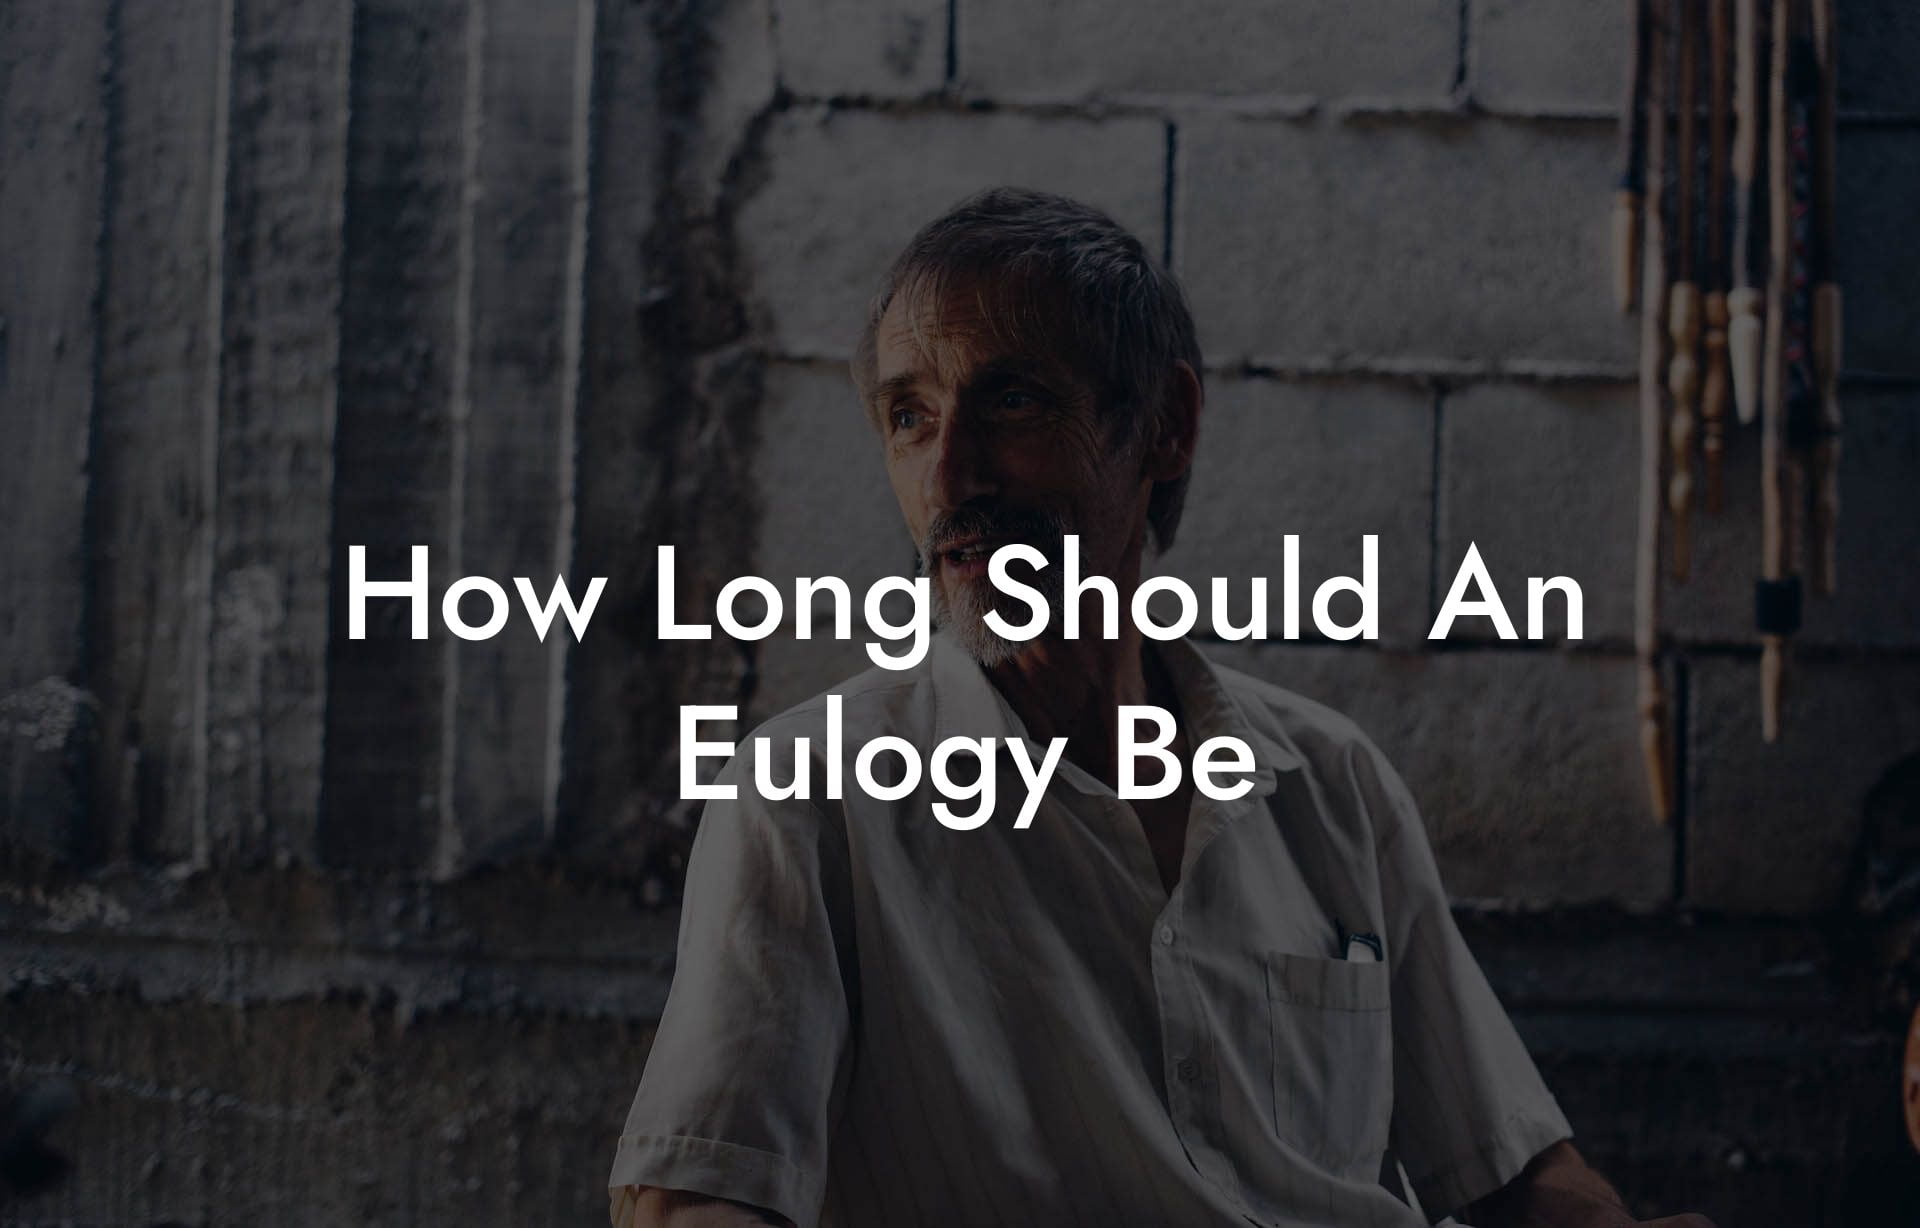 How Long Should An Eulogy Be